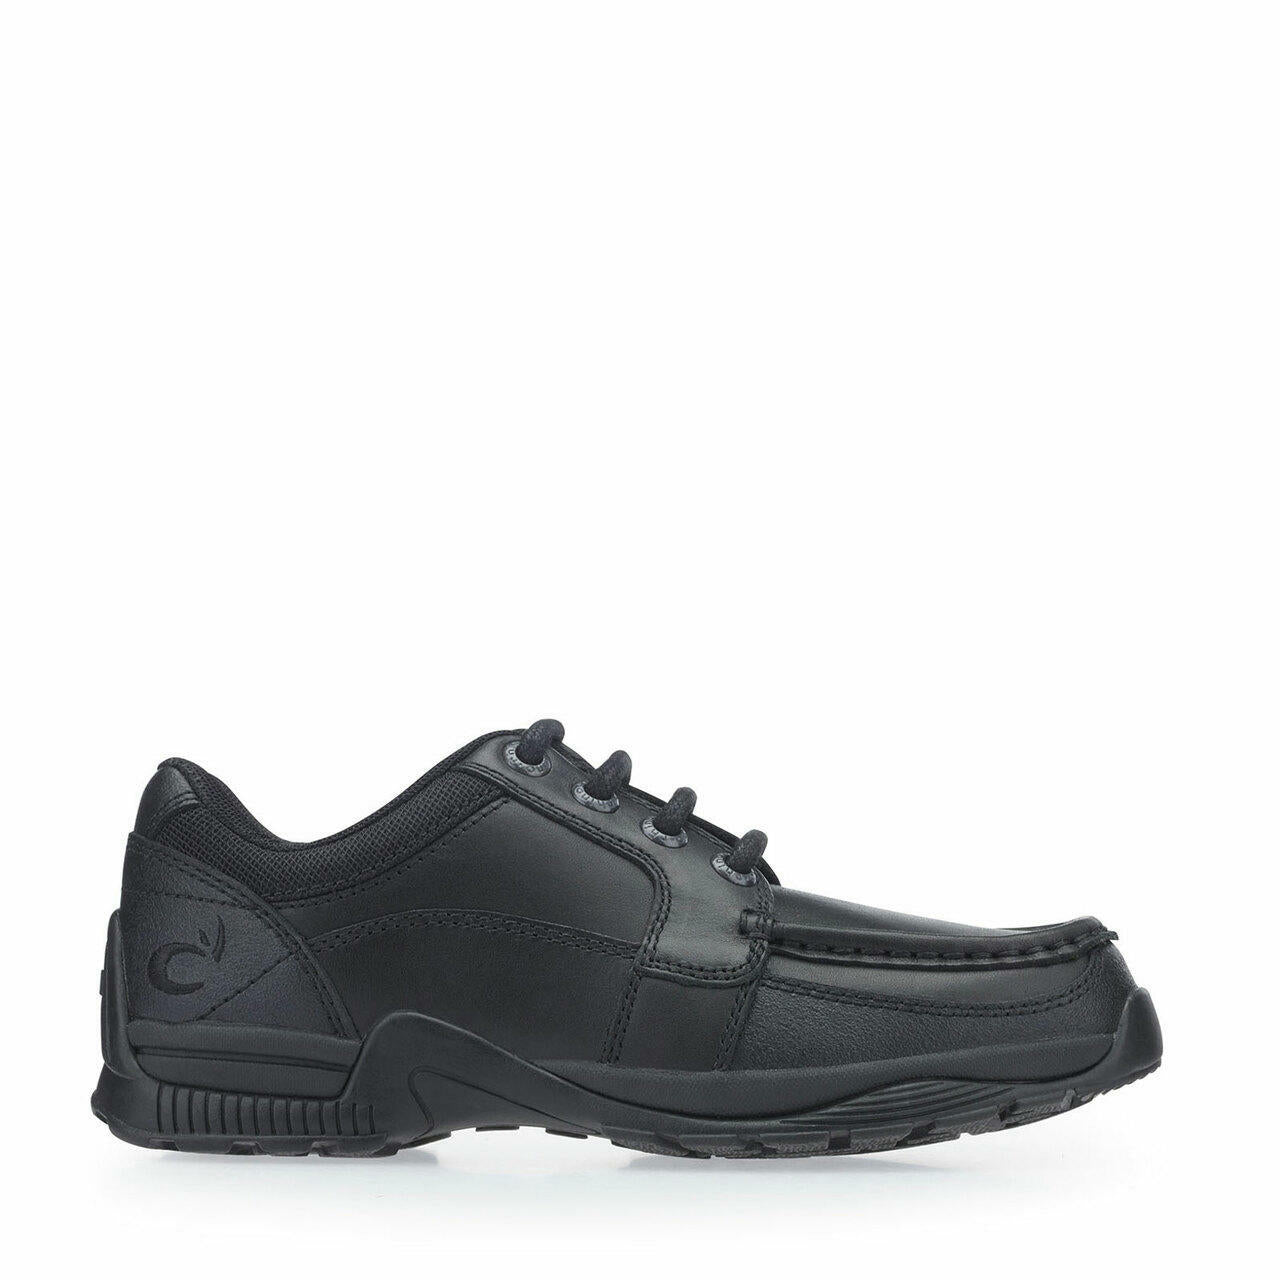 A boys school shoe by Start Rite,style Dylan, in black leather with lace up fastening. Right side view. view.